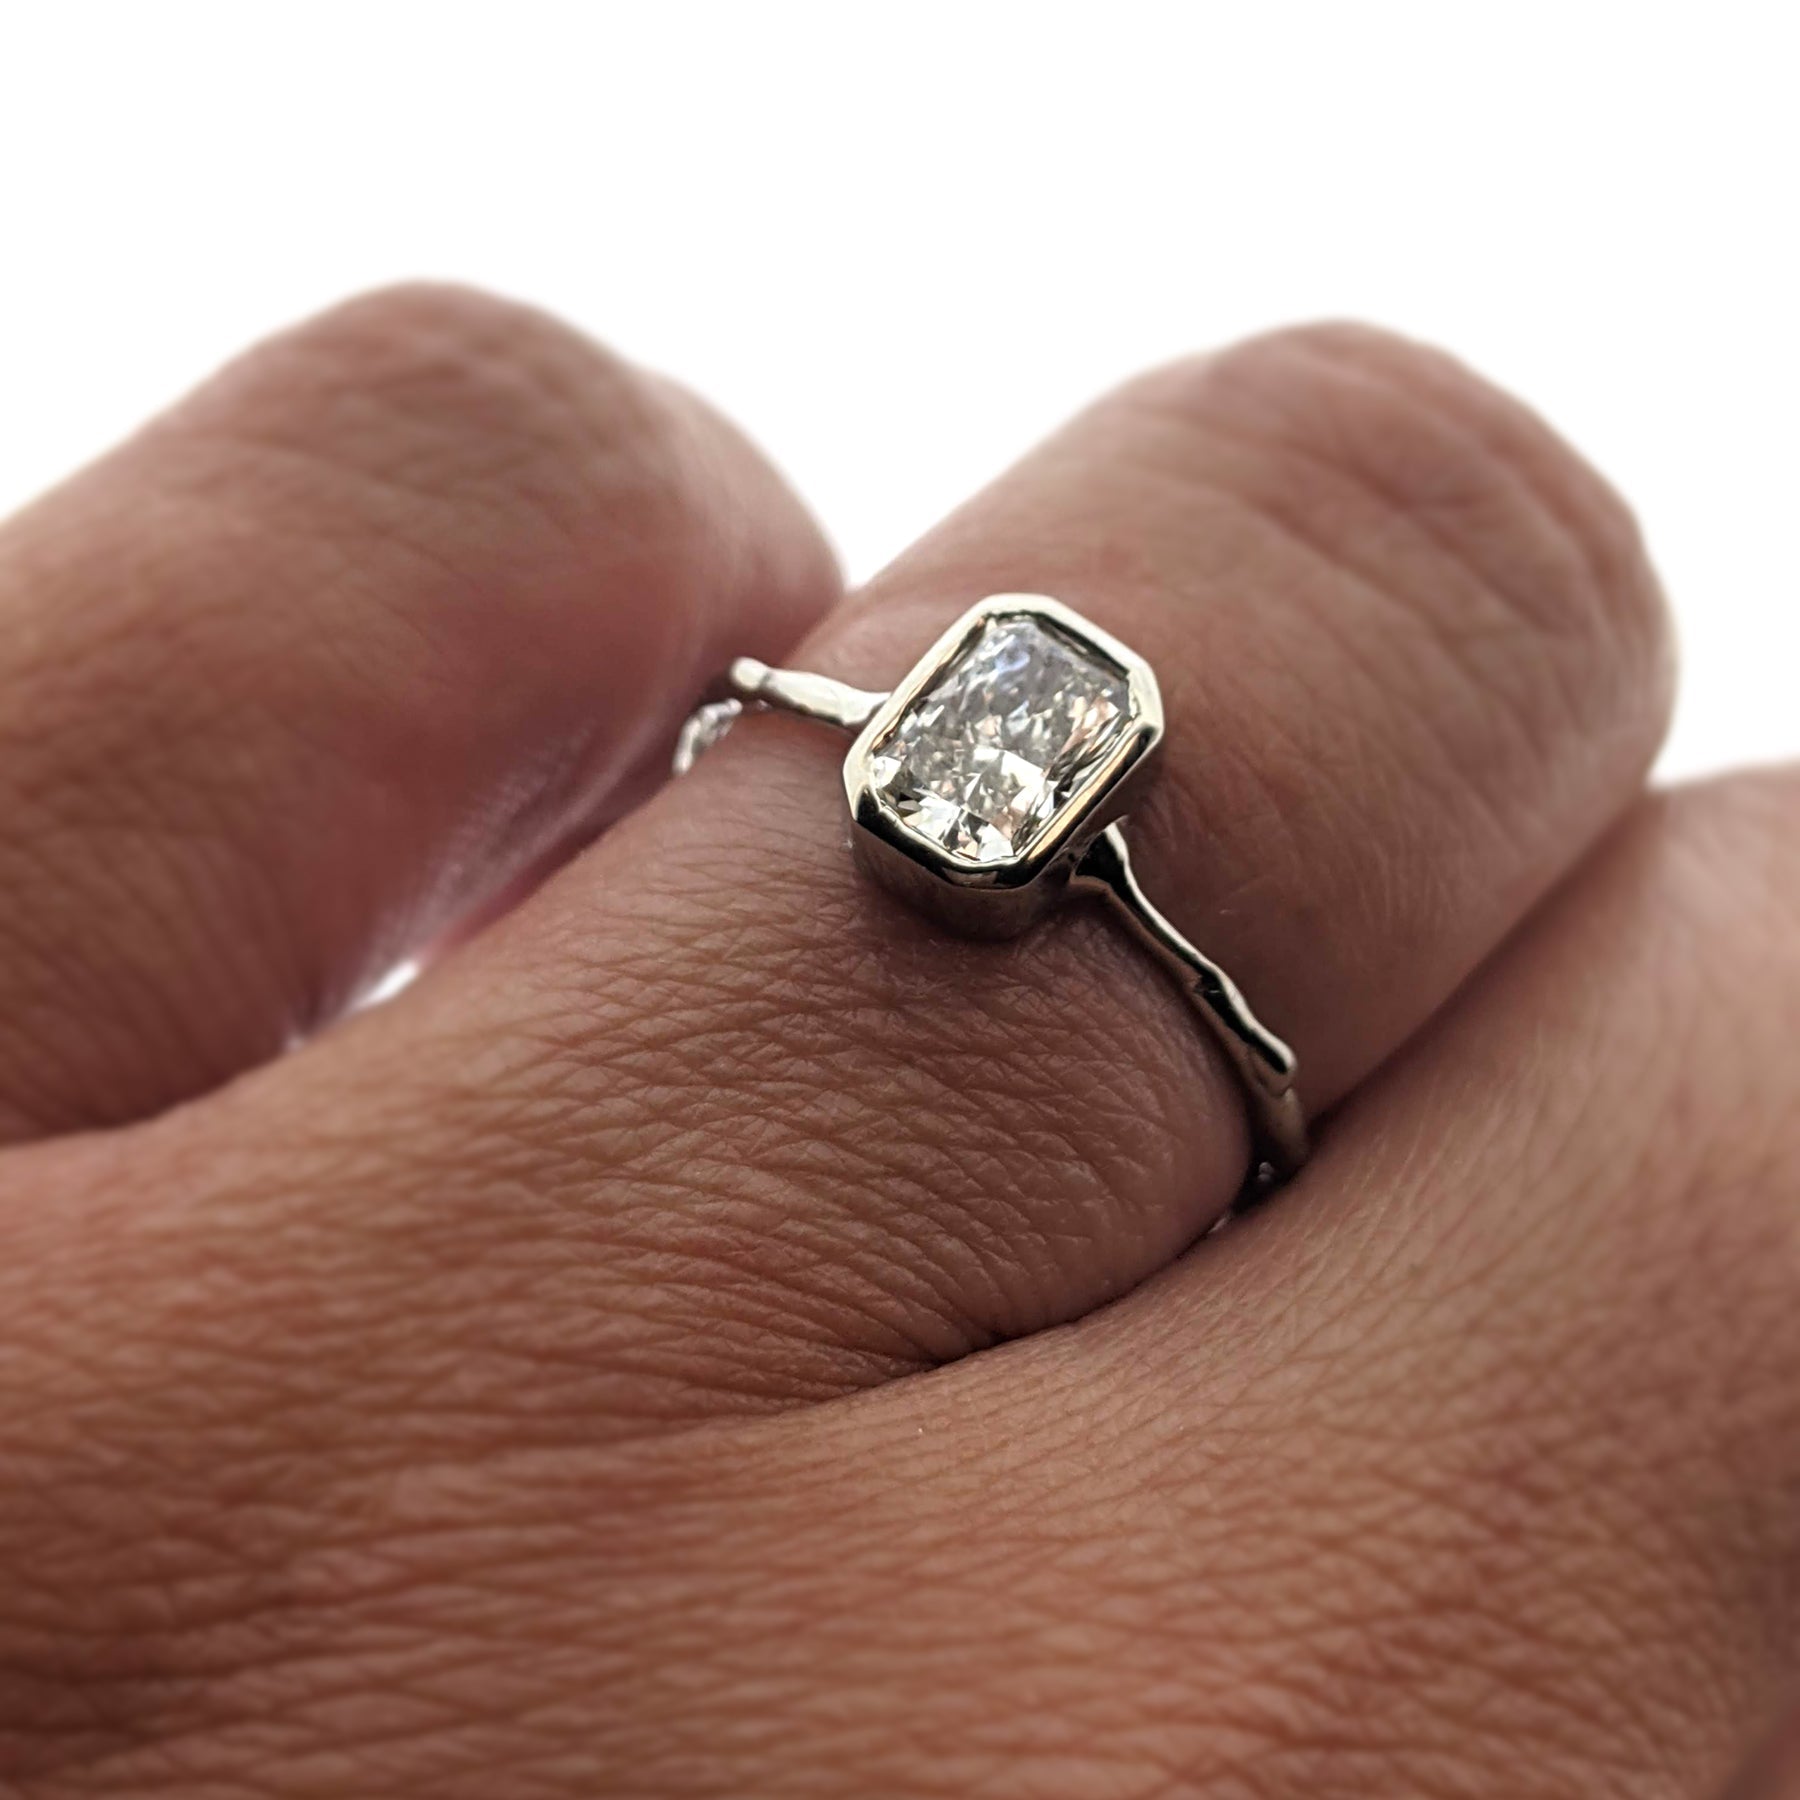 Close up view of AnnaBeth Diamond Ring on woman's hand to help give an idea of its scale.